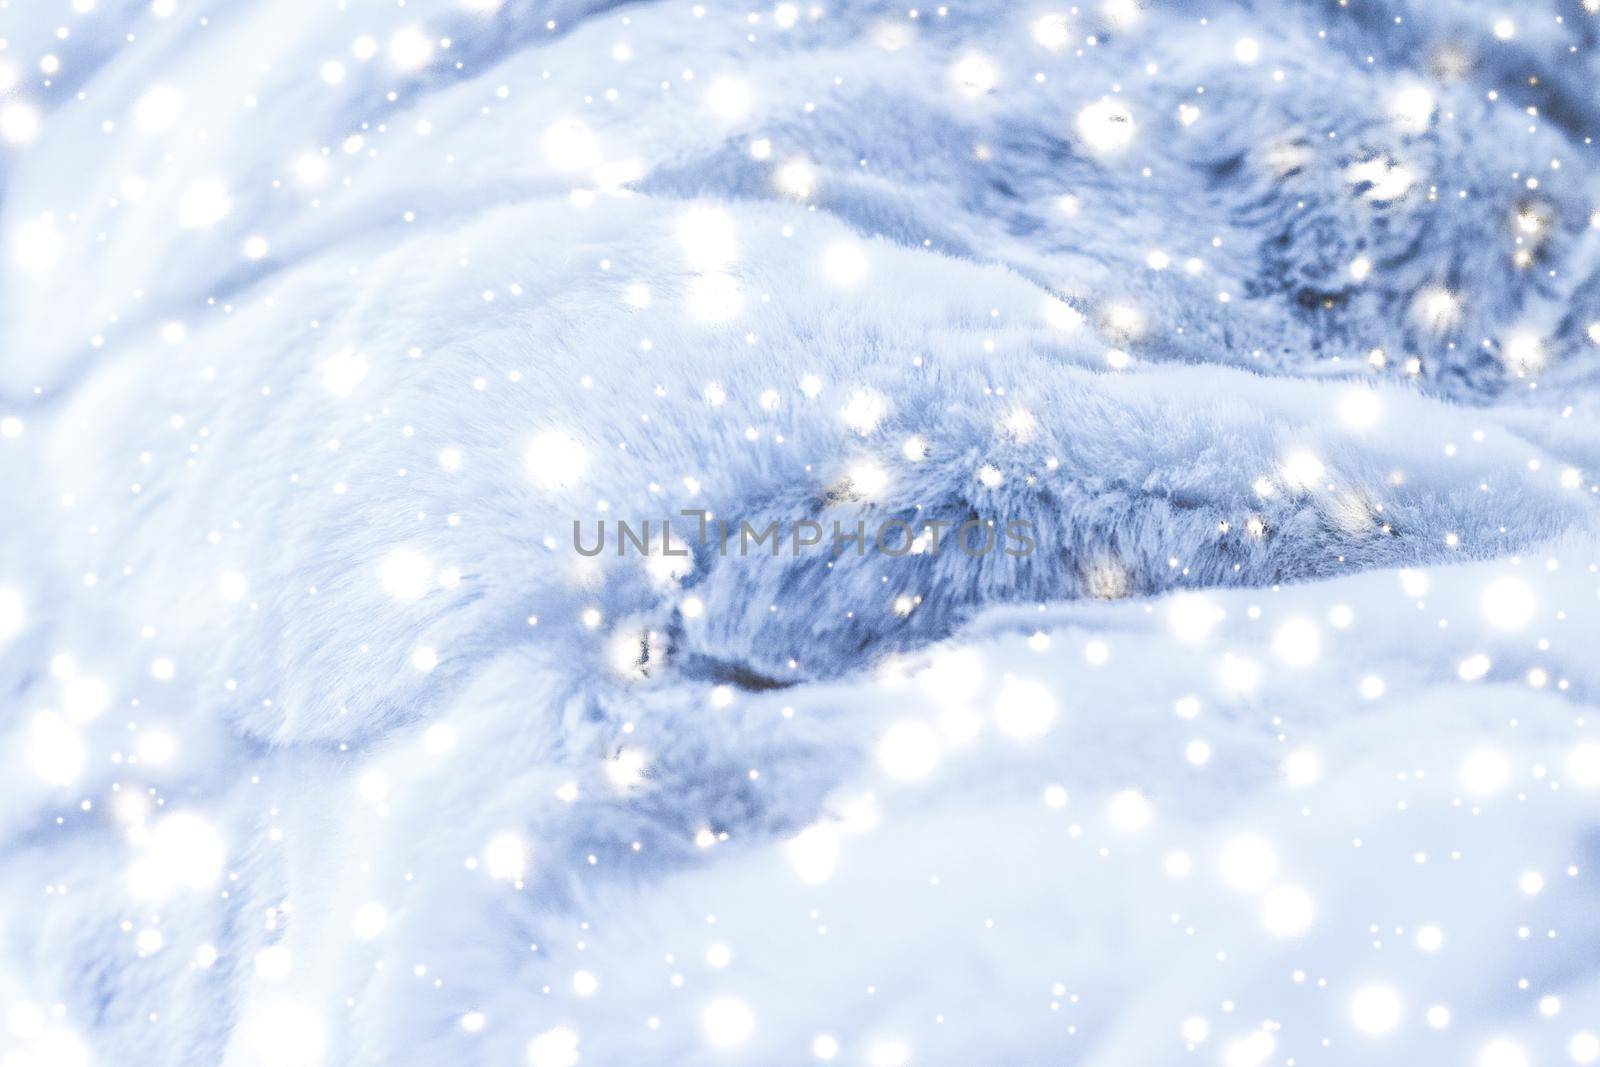 Christmas backdrop, warm winter clothing and fashion design concept - Holiday winter background, luxury fur coat texture detail and glowing snow